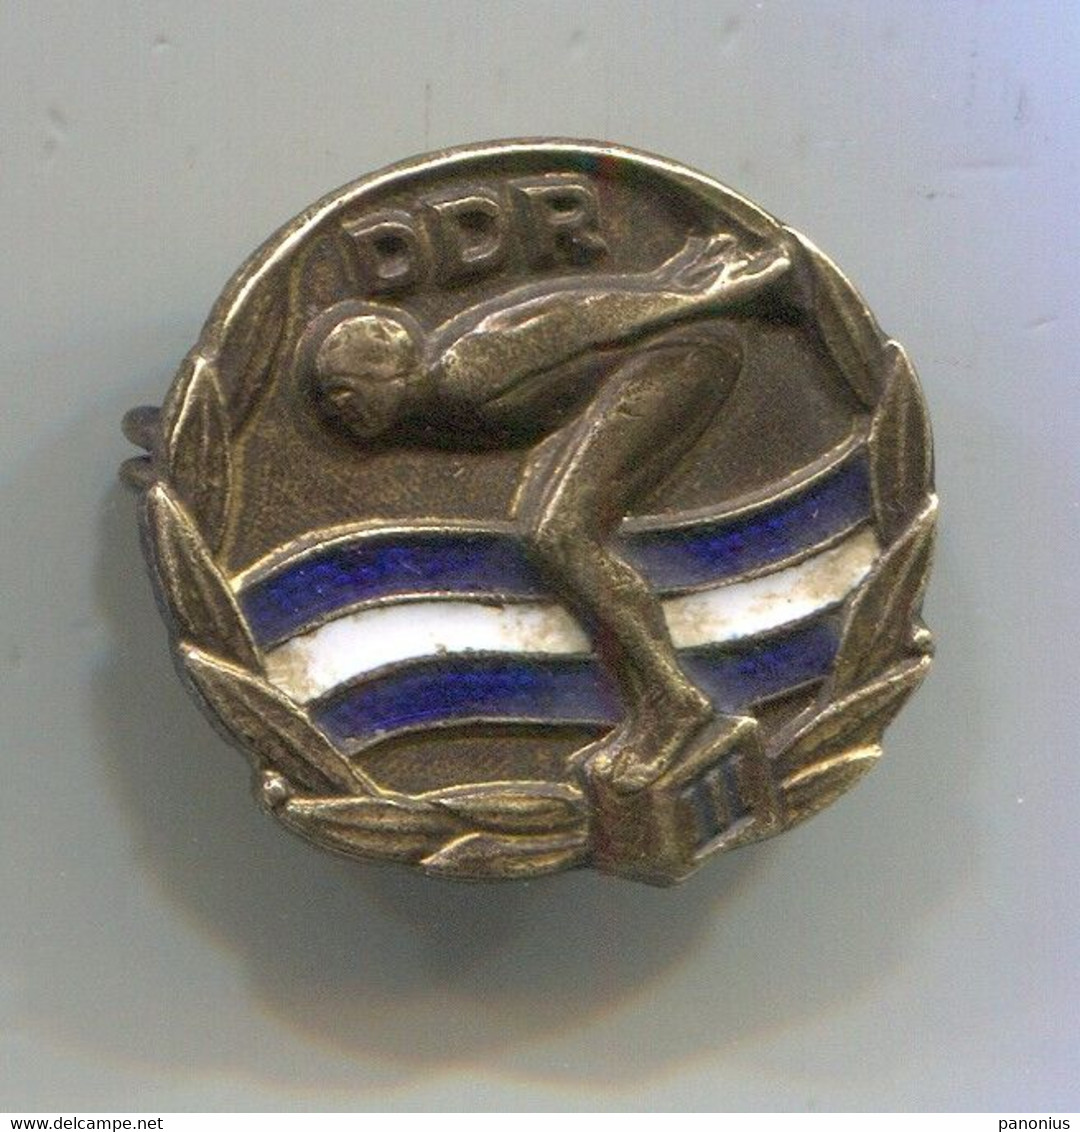 Swimming Natation - DDR East Germany, Vintage Pin Badge, Abzeichen - Natation